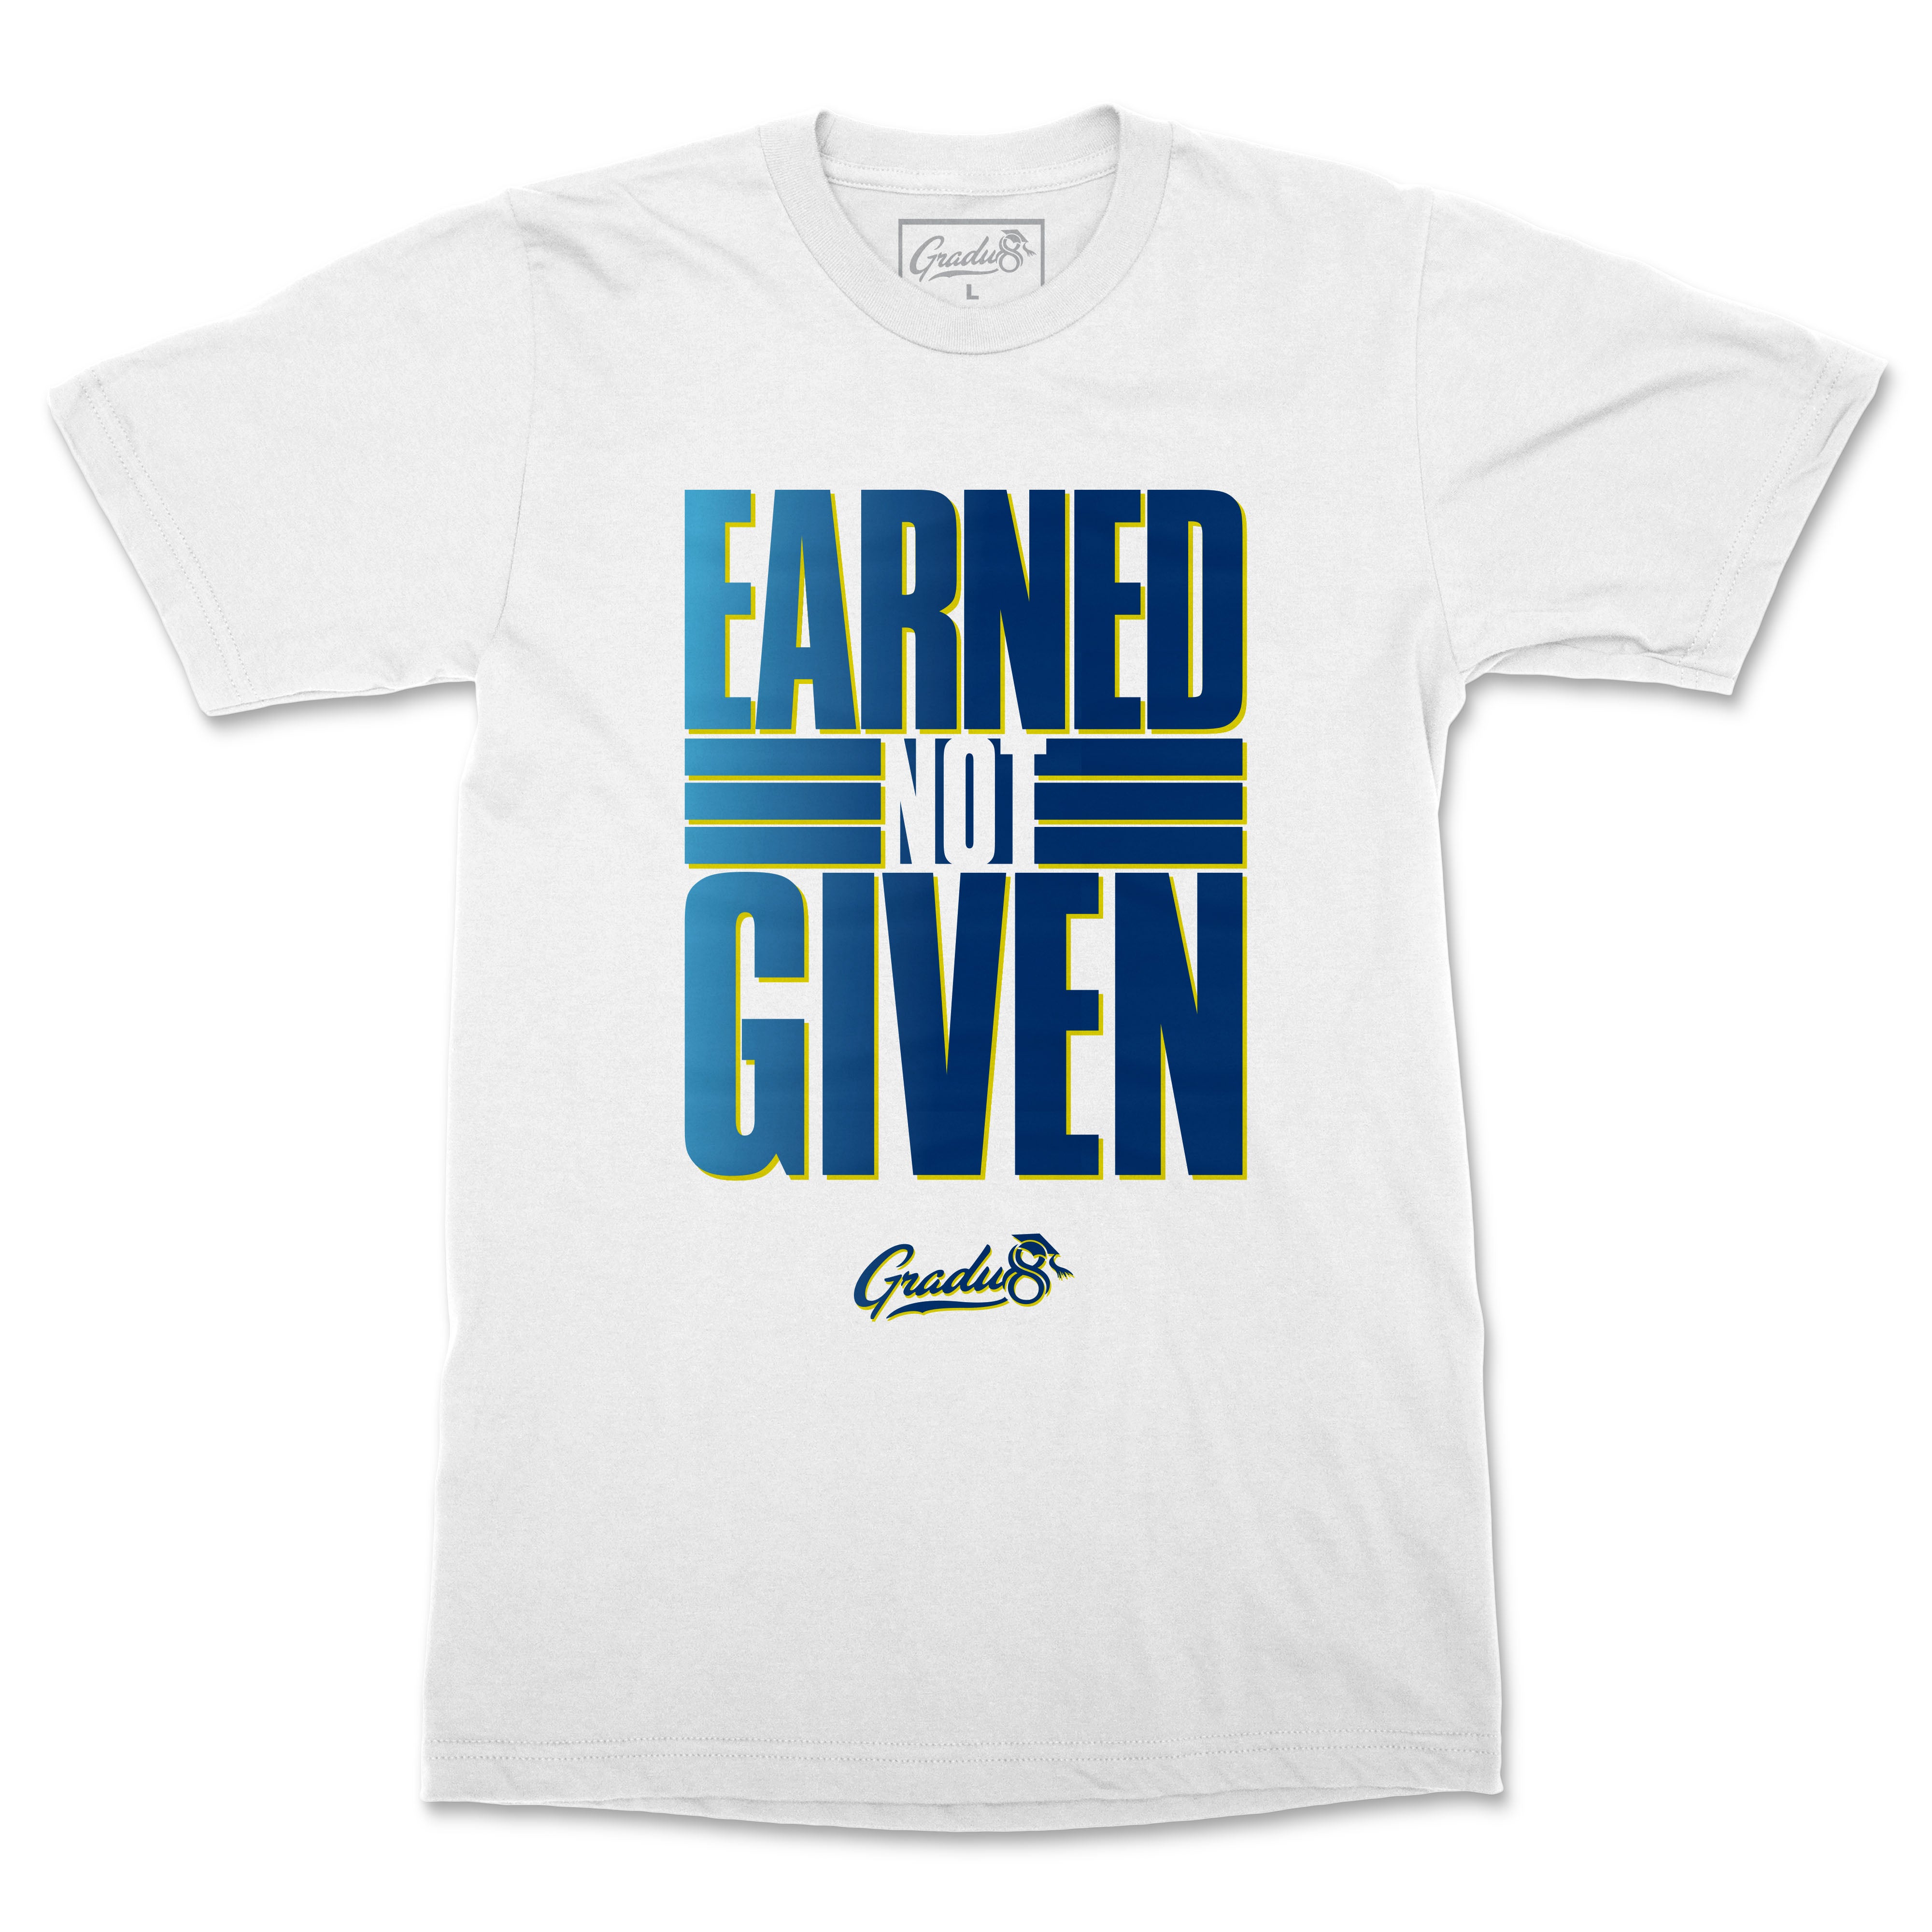 Earned Not Given Premium T-shirt - White